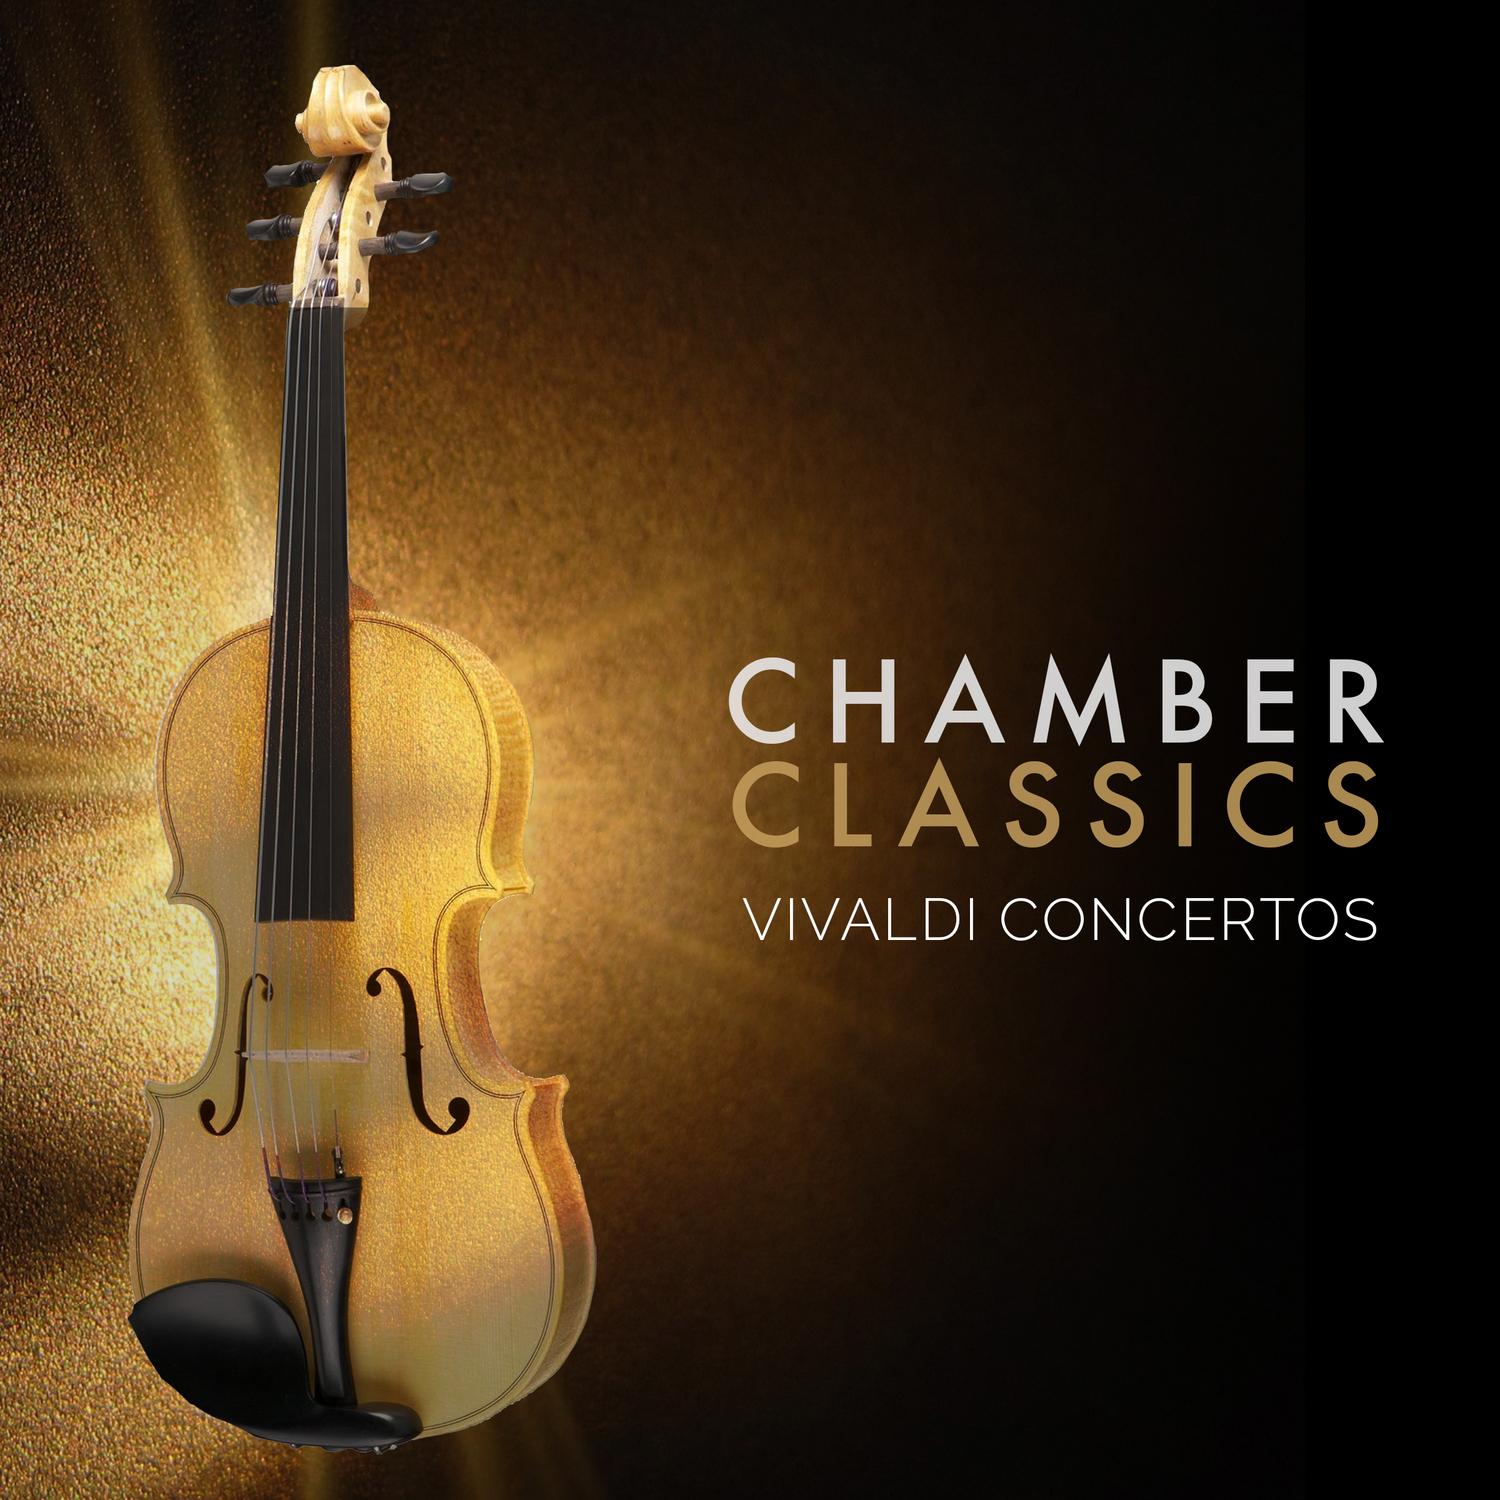 Concerto for Two Violins and String Orchestra in A Minor, Op. 3, No. 8, RV 522: III. Allegro